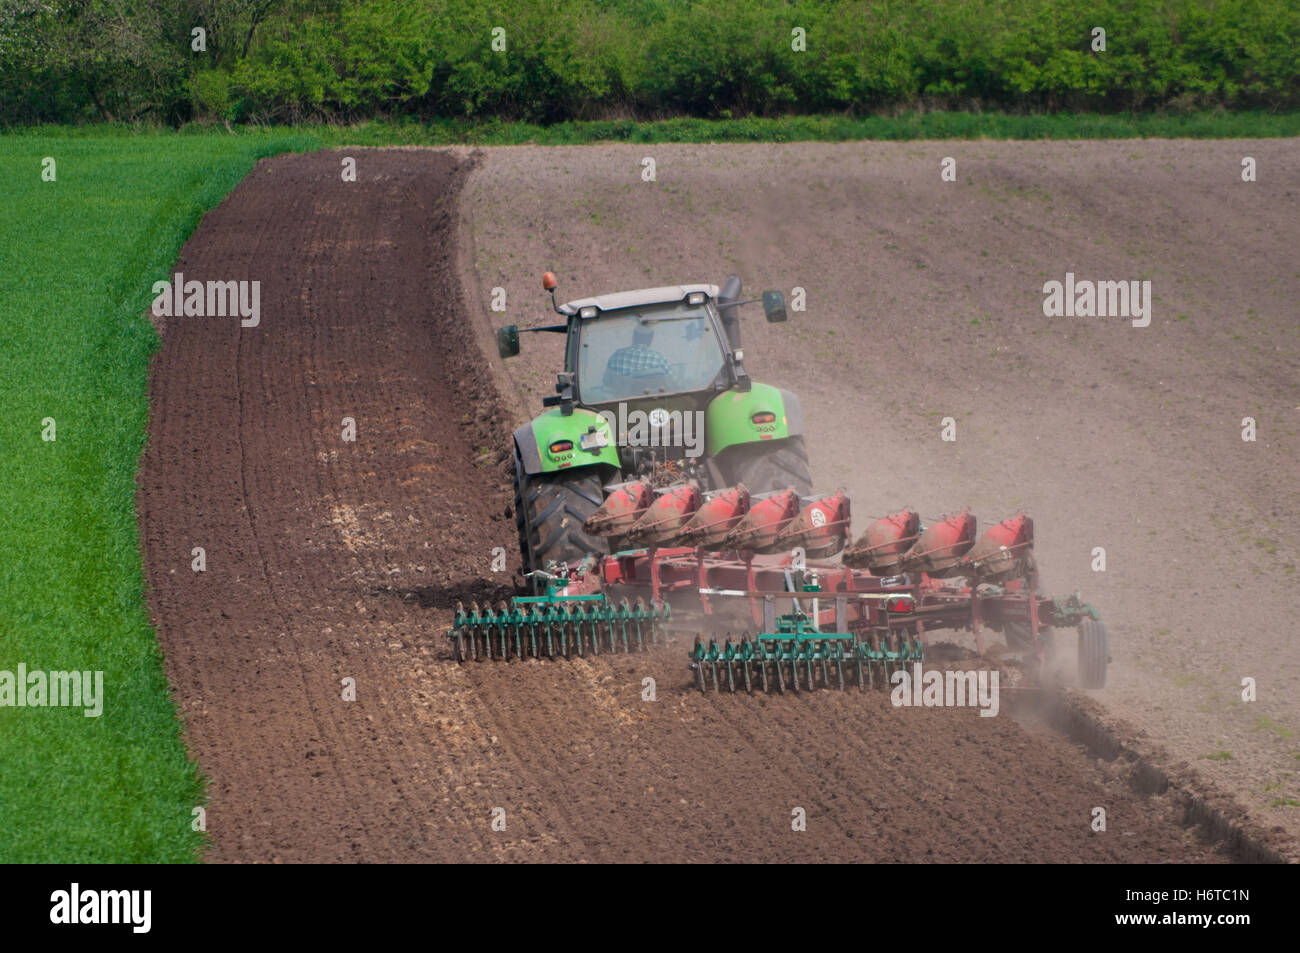 agriculture farming field farm tractor plowing agricultural single wheel machinery traffic transportation ground soil earth Stock Photo